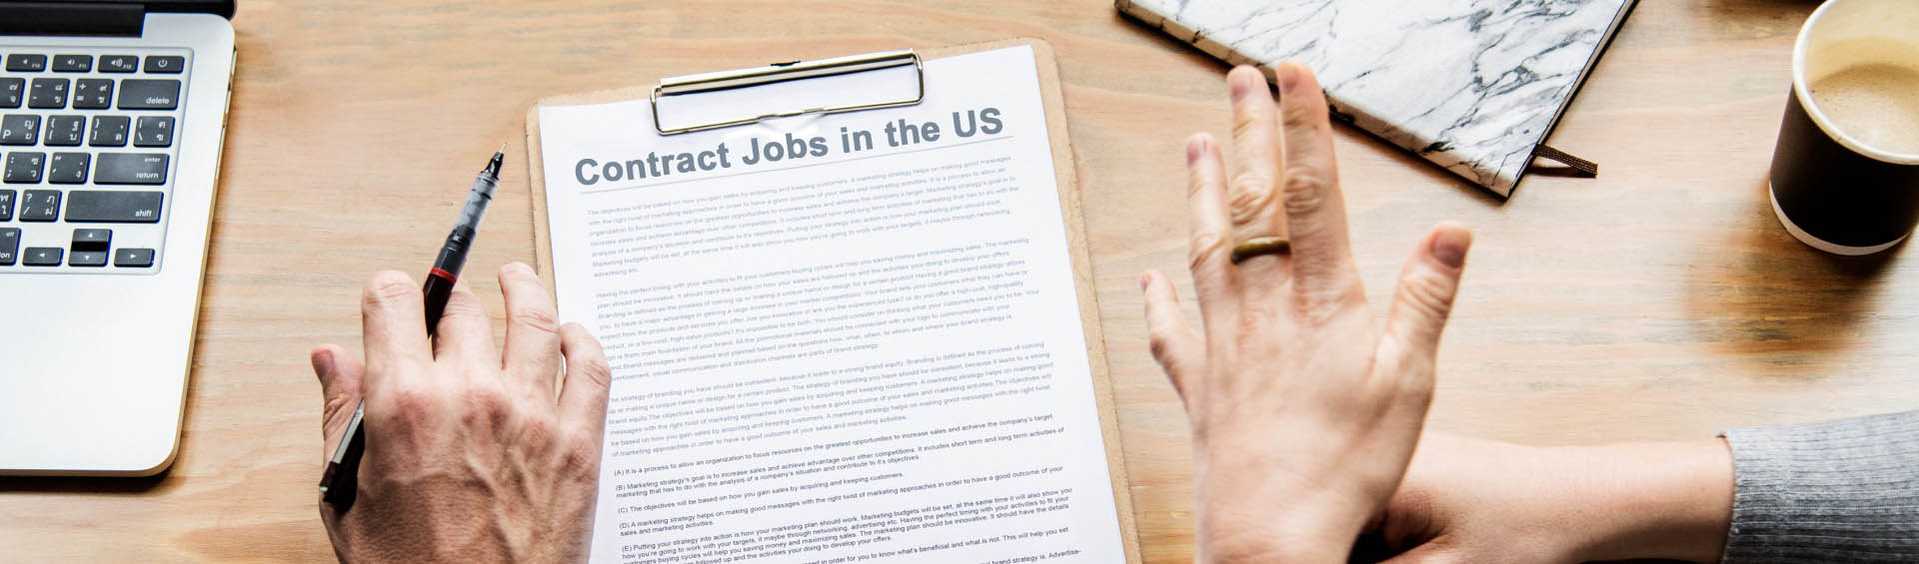 Contract jobs in the United States